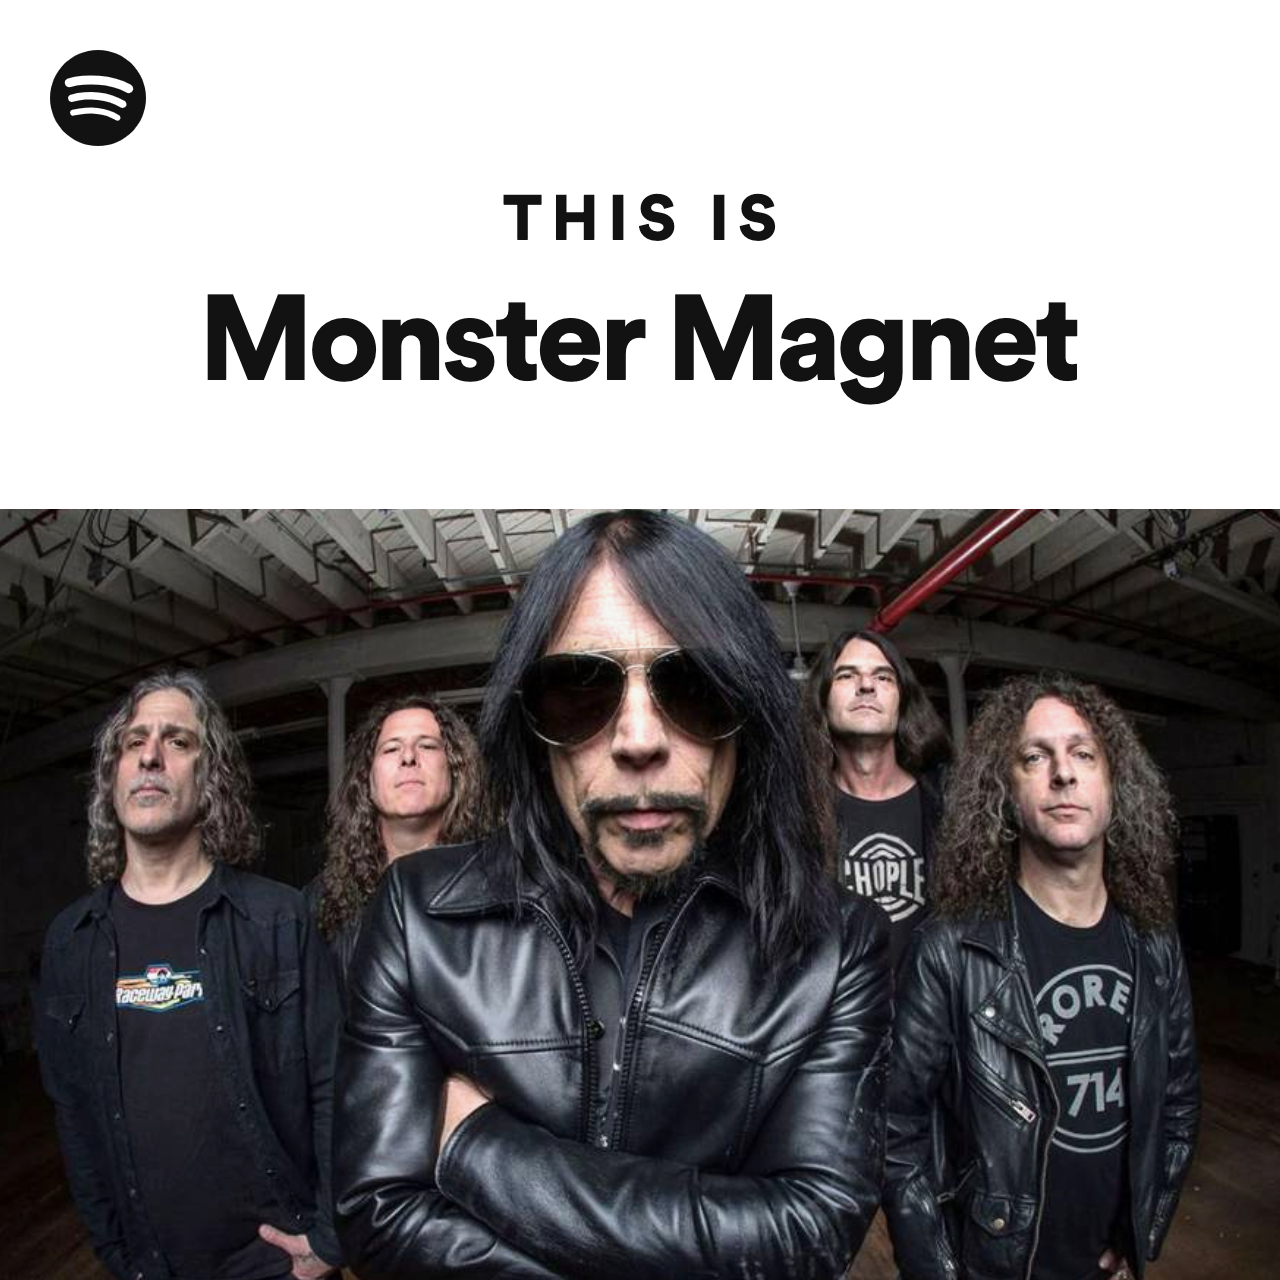 This Is Monster Magnet